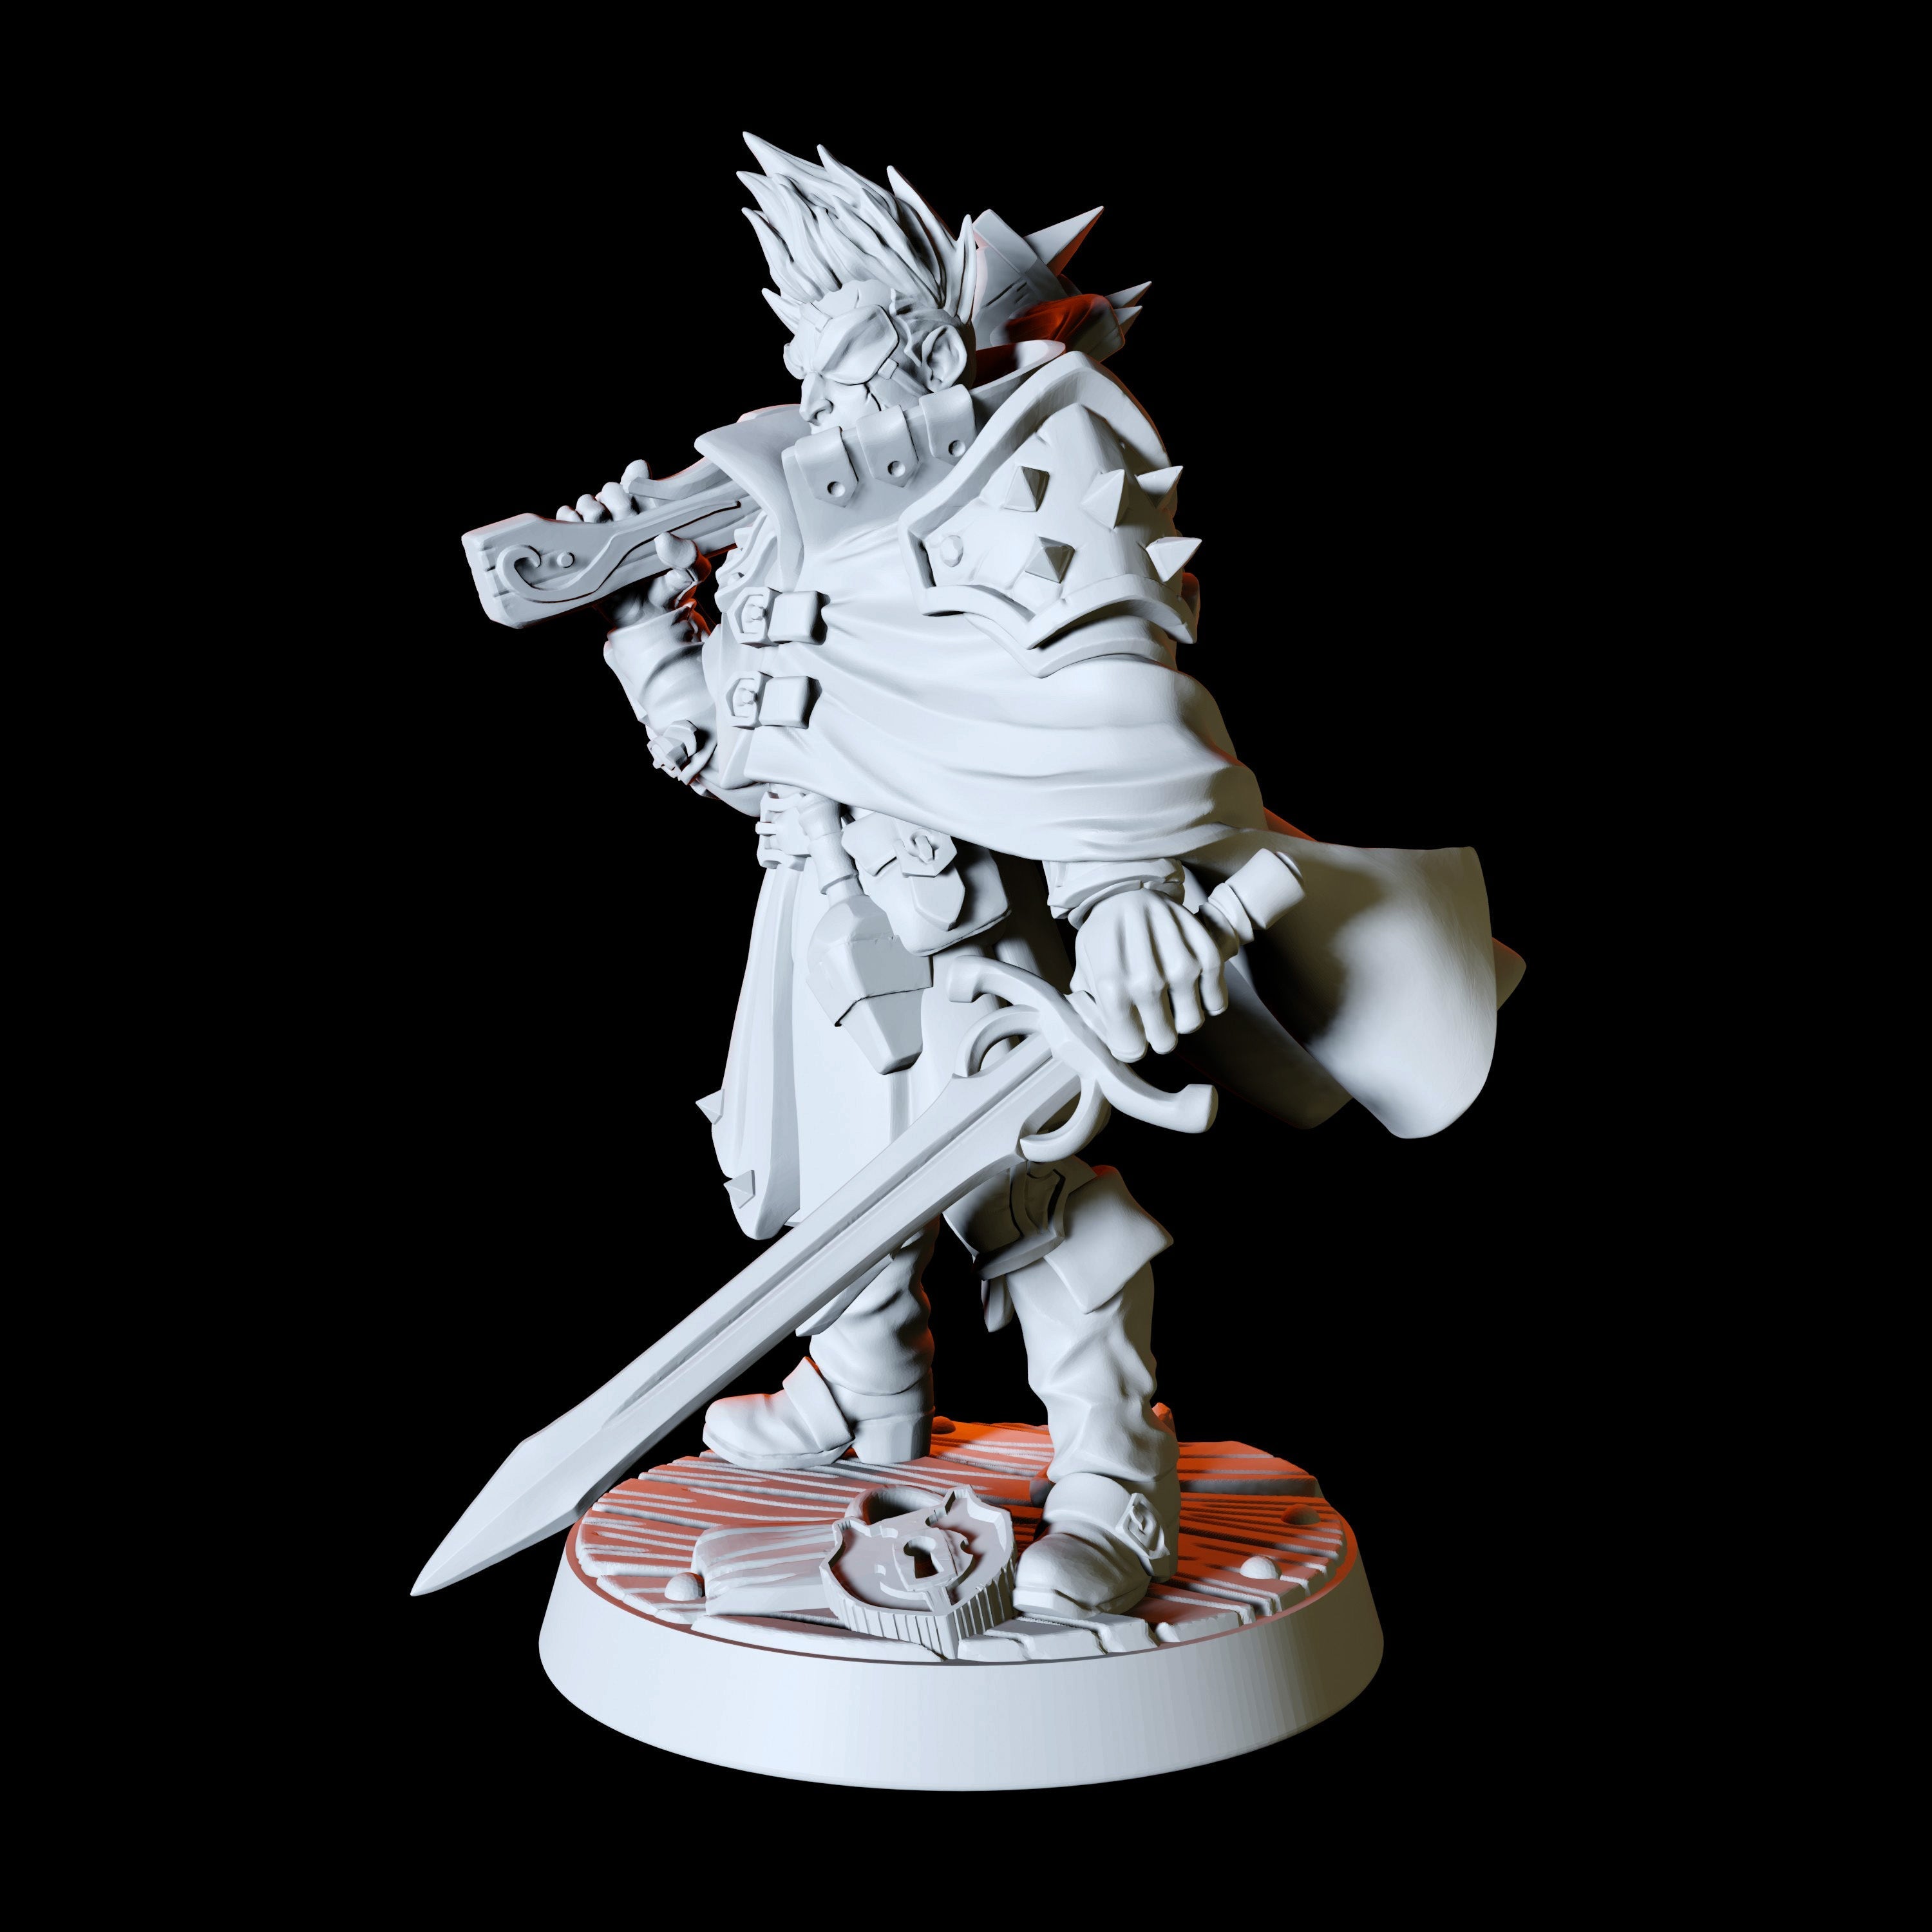 Human Master Thief Miniature for Dungeons and Dragons - Myth Forged